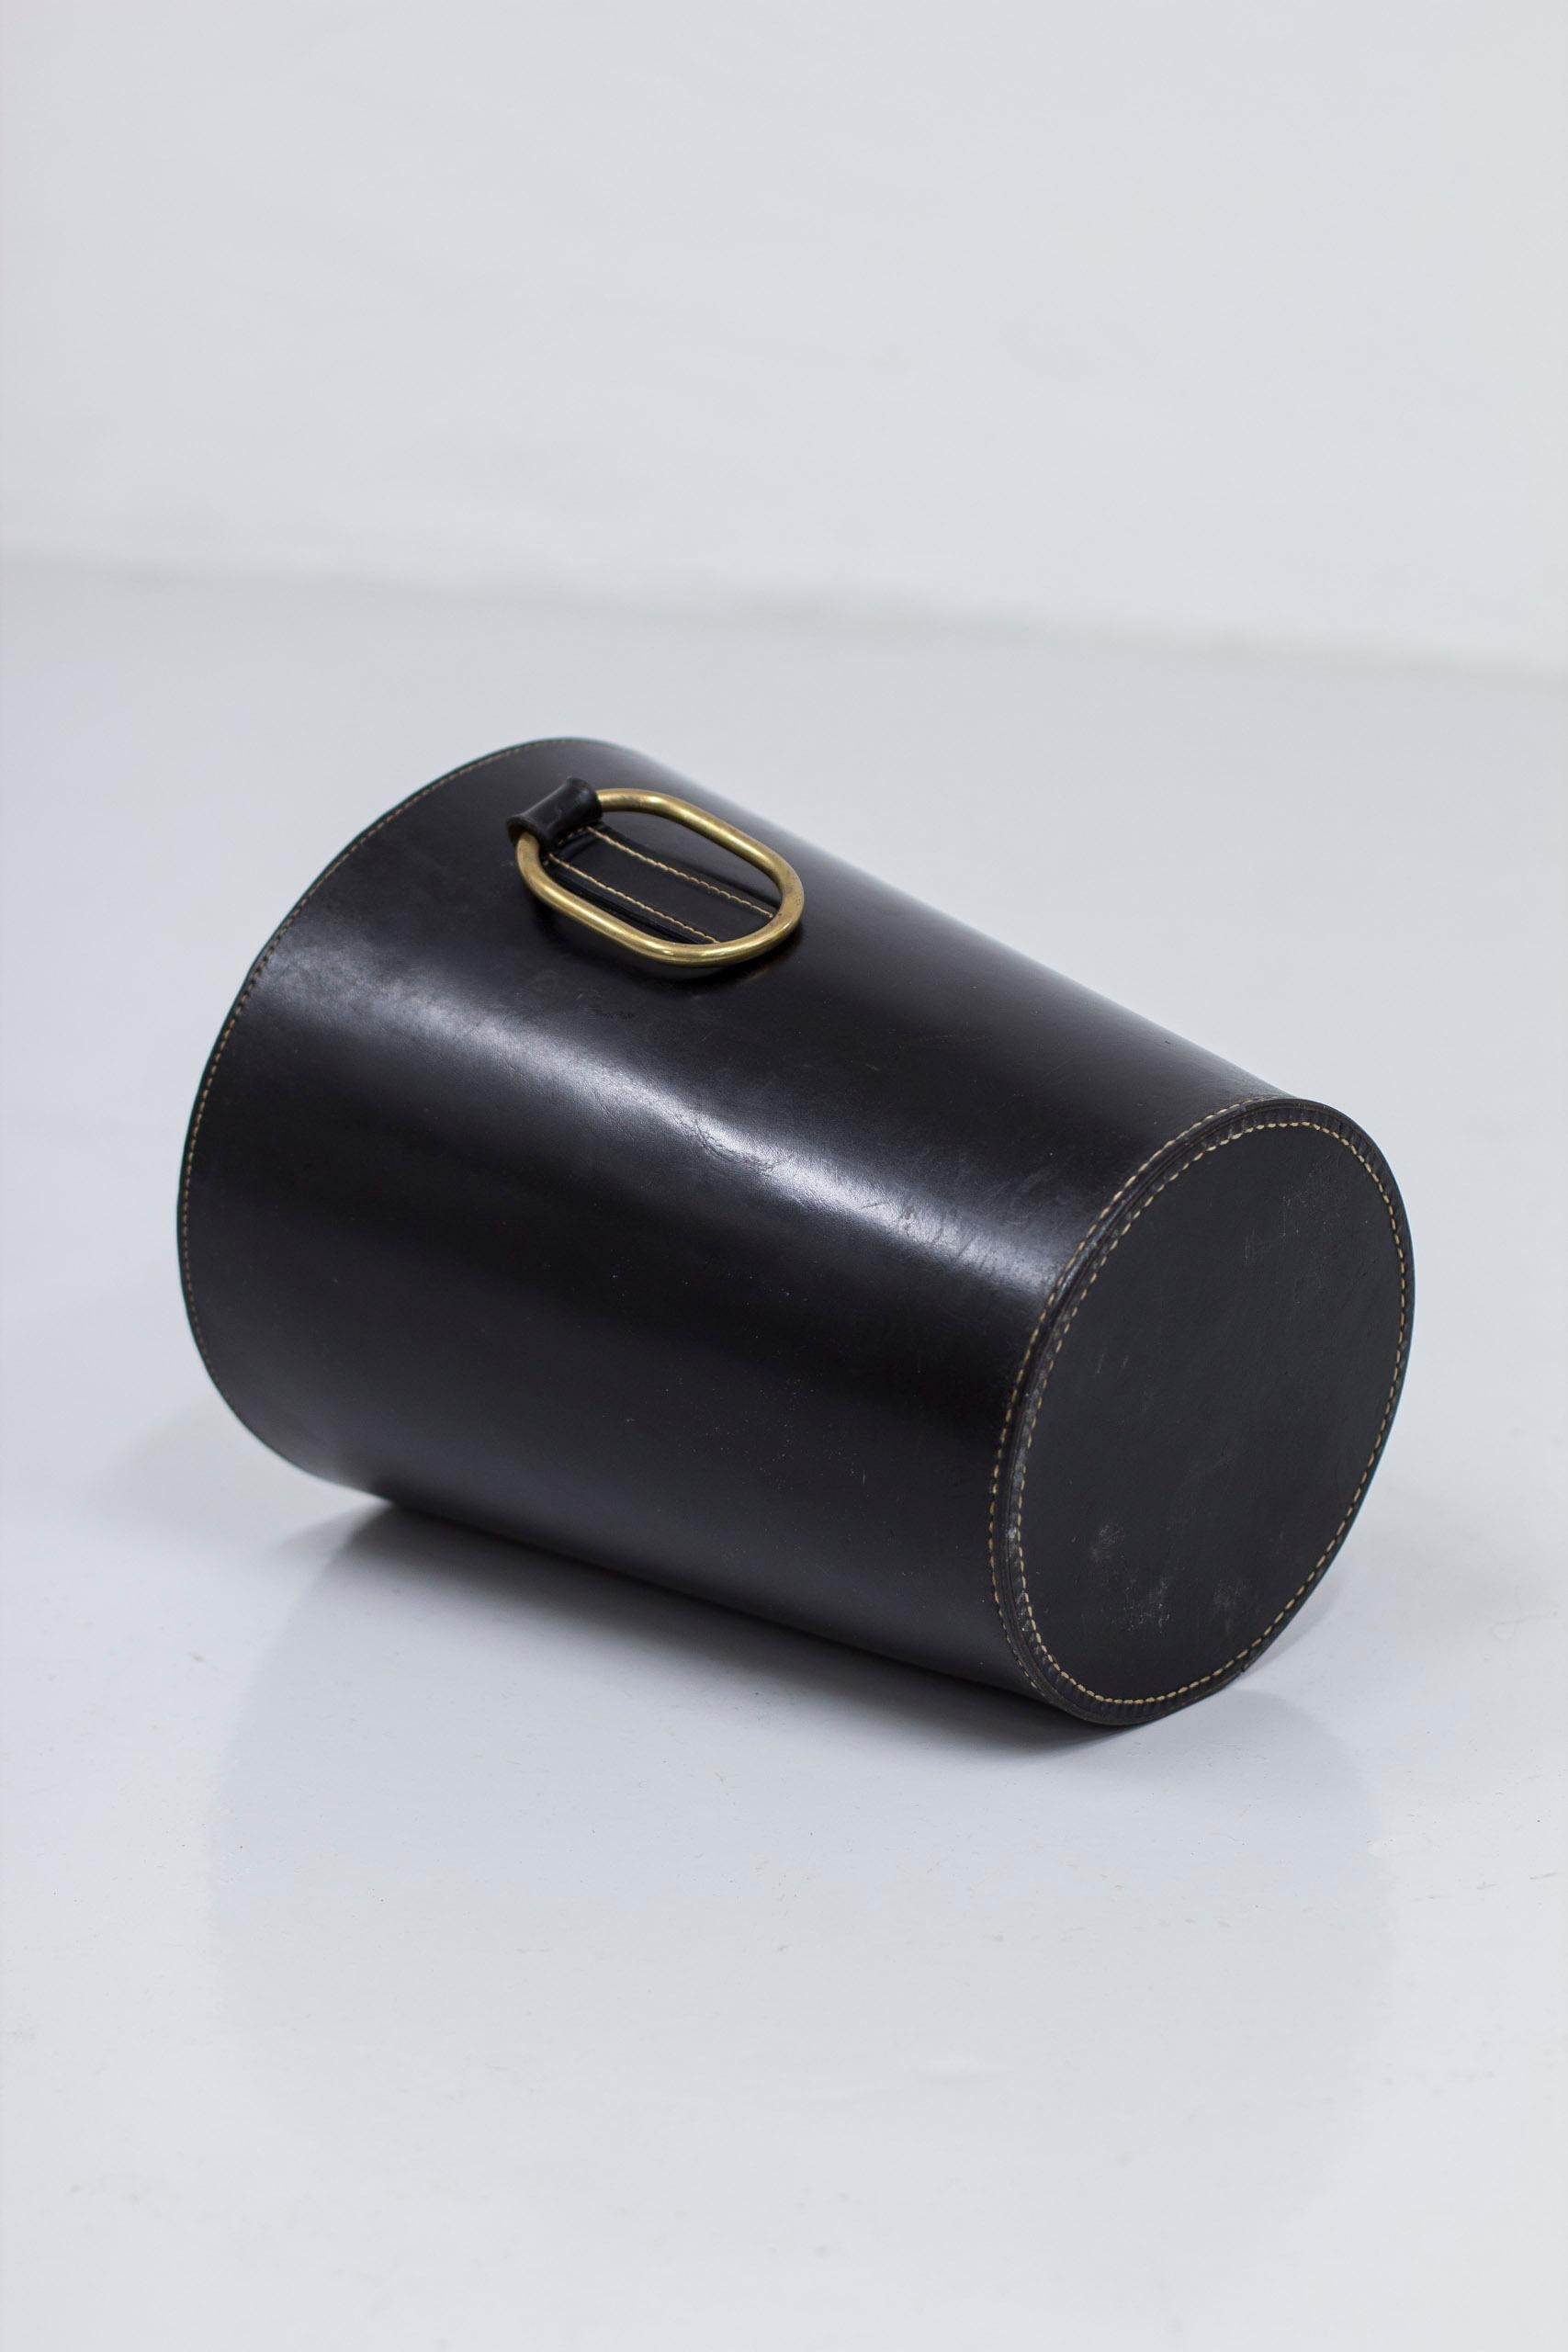 Mid-20th Century 1950s Waste Basket in black leather by Carl Auböck, Austria, crafts For Sale